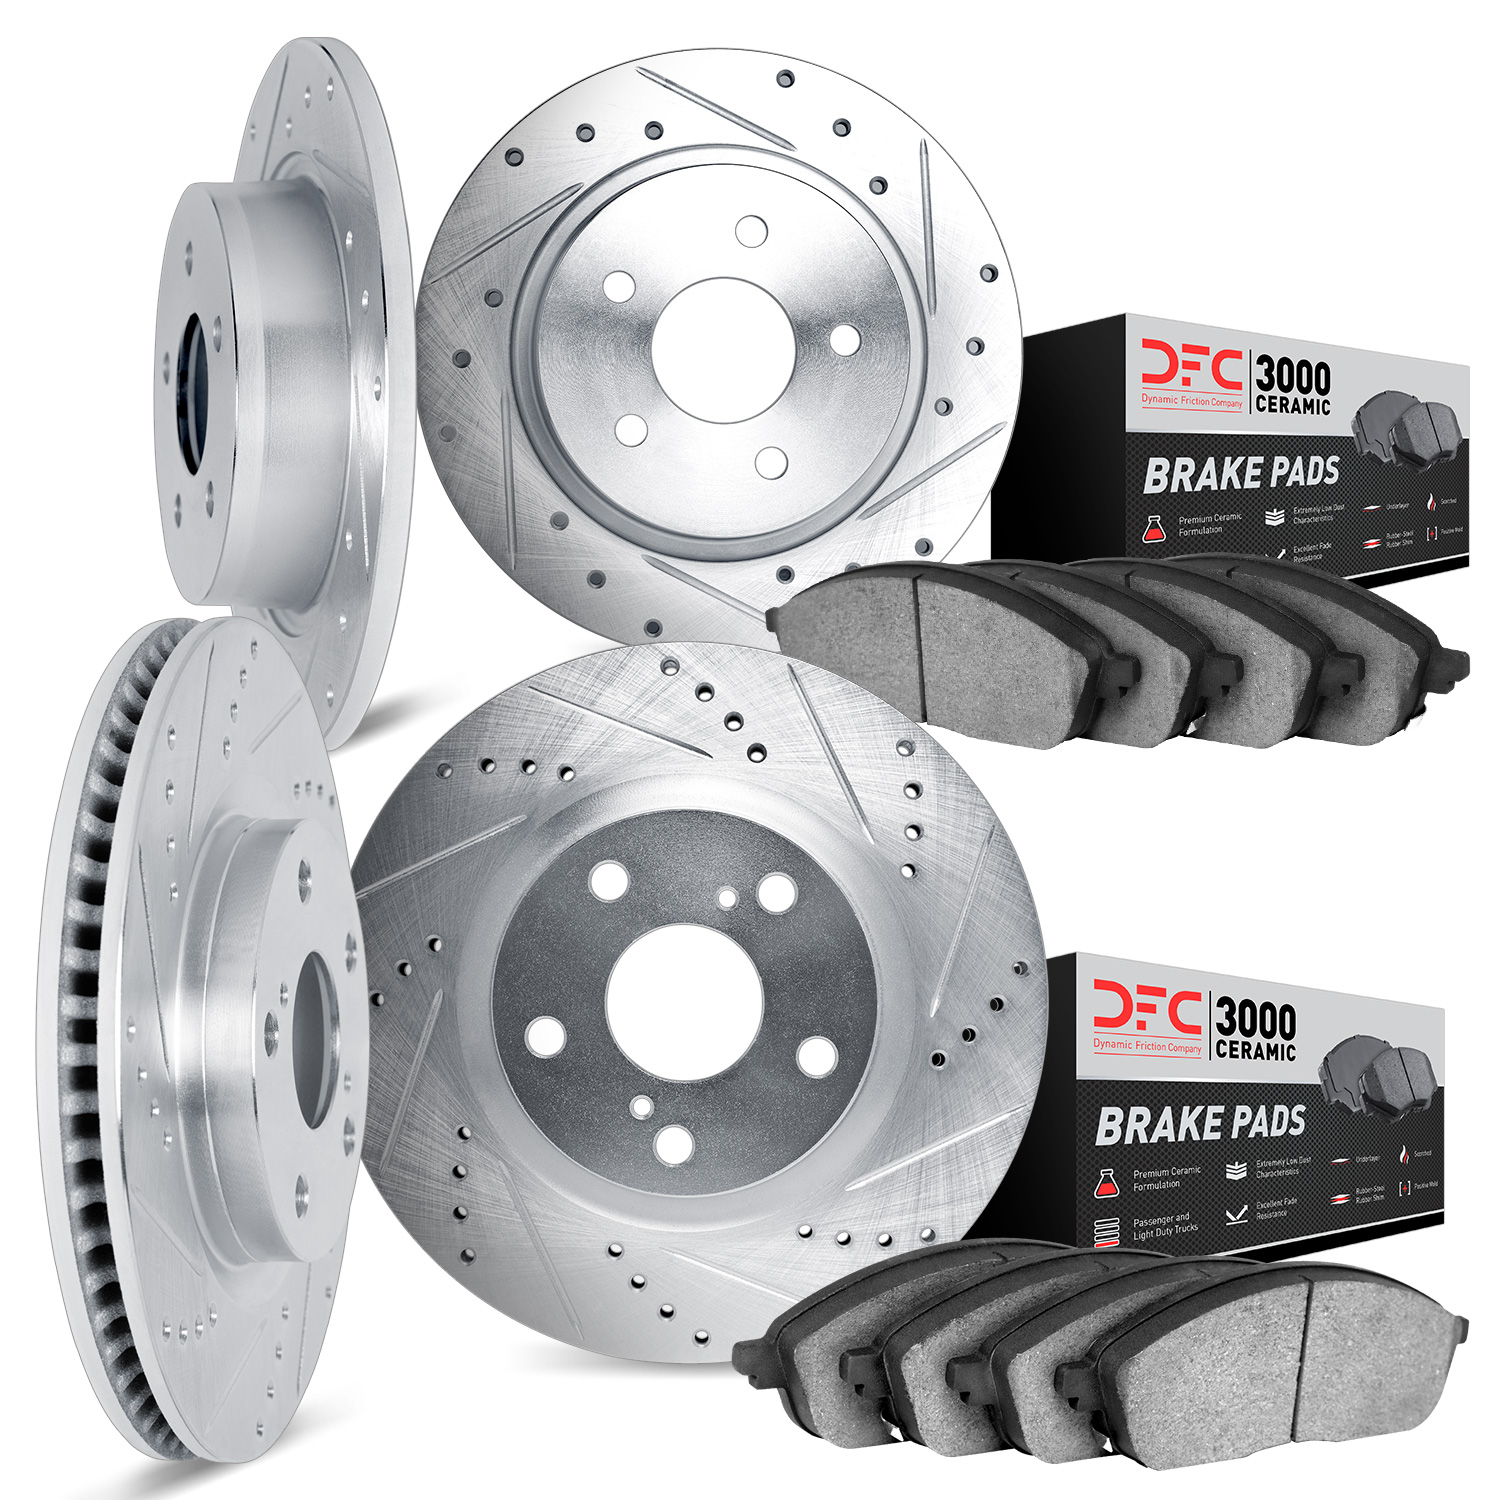 7304-54054 Drilled/Slotted Brake Rotor with 3000-Series Ceramic Brake Pads Kit [Silver], 2003-2005 Ford/Lincoln/Mercury/Mazda, P